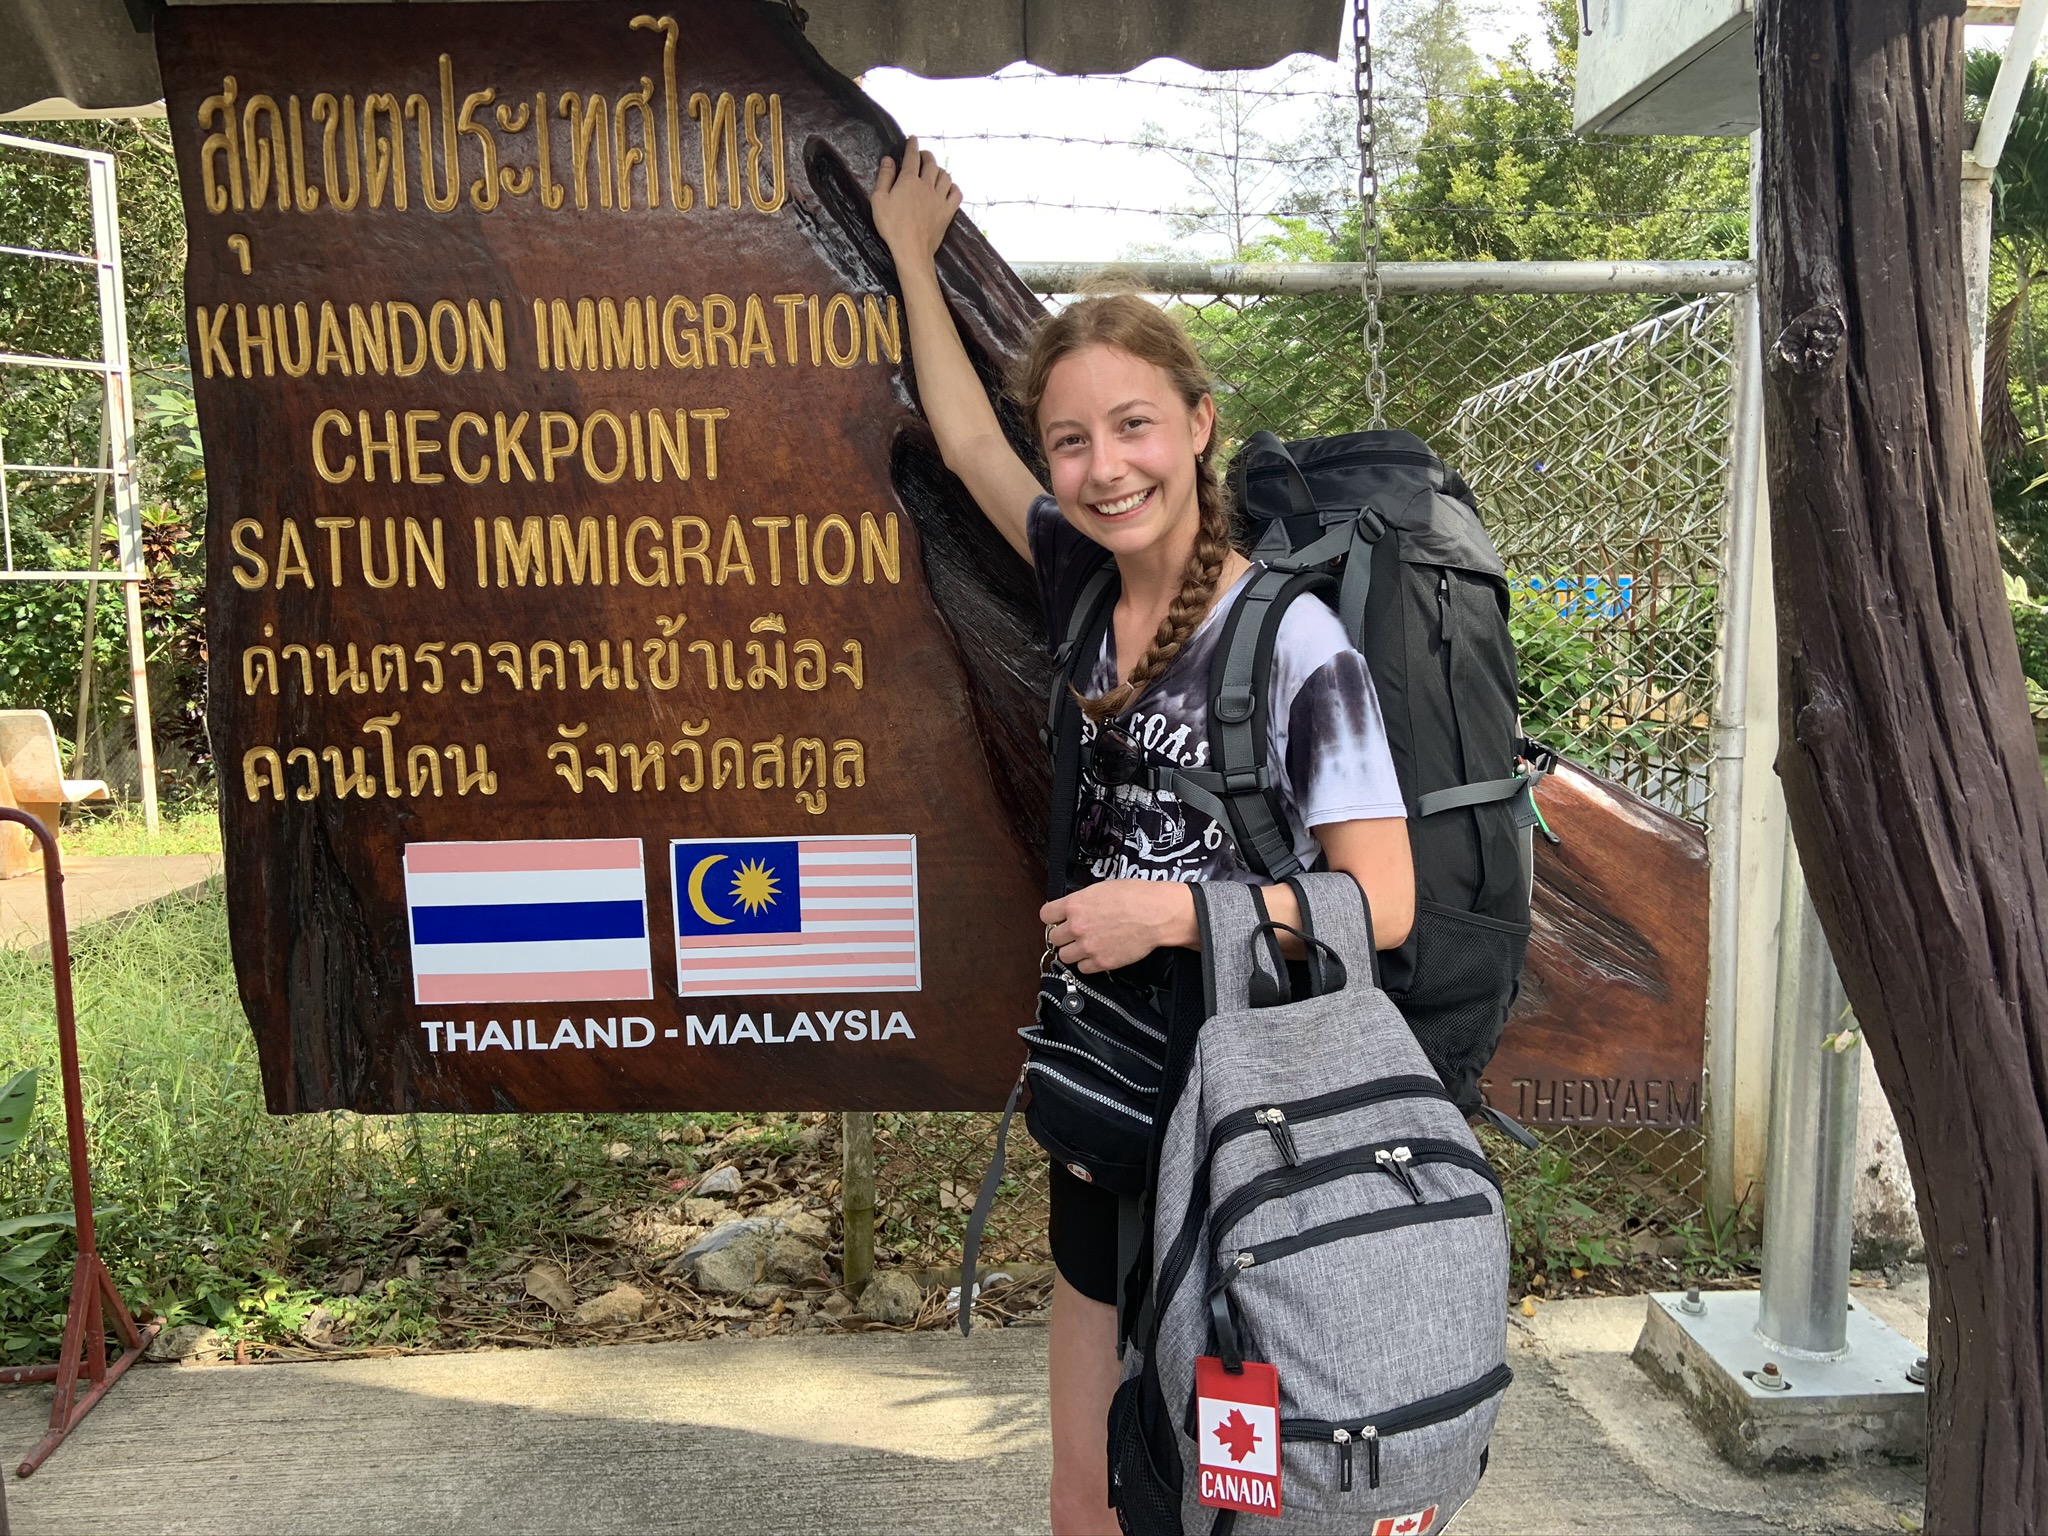 A smiling woman with a long braid of brown hair in a t-shirt and shorts, holding a grey backpack and wearing a large black backpack, next to a sign indicating the immigration checkpoint between Thailand and Malaysia.